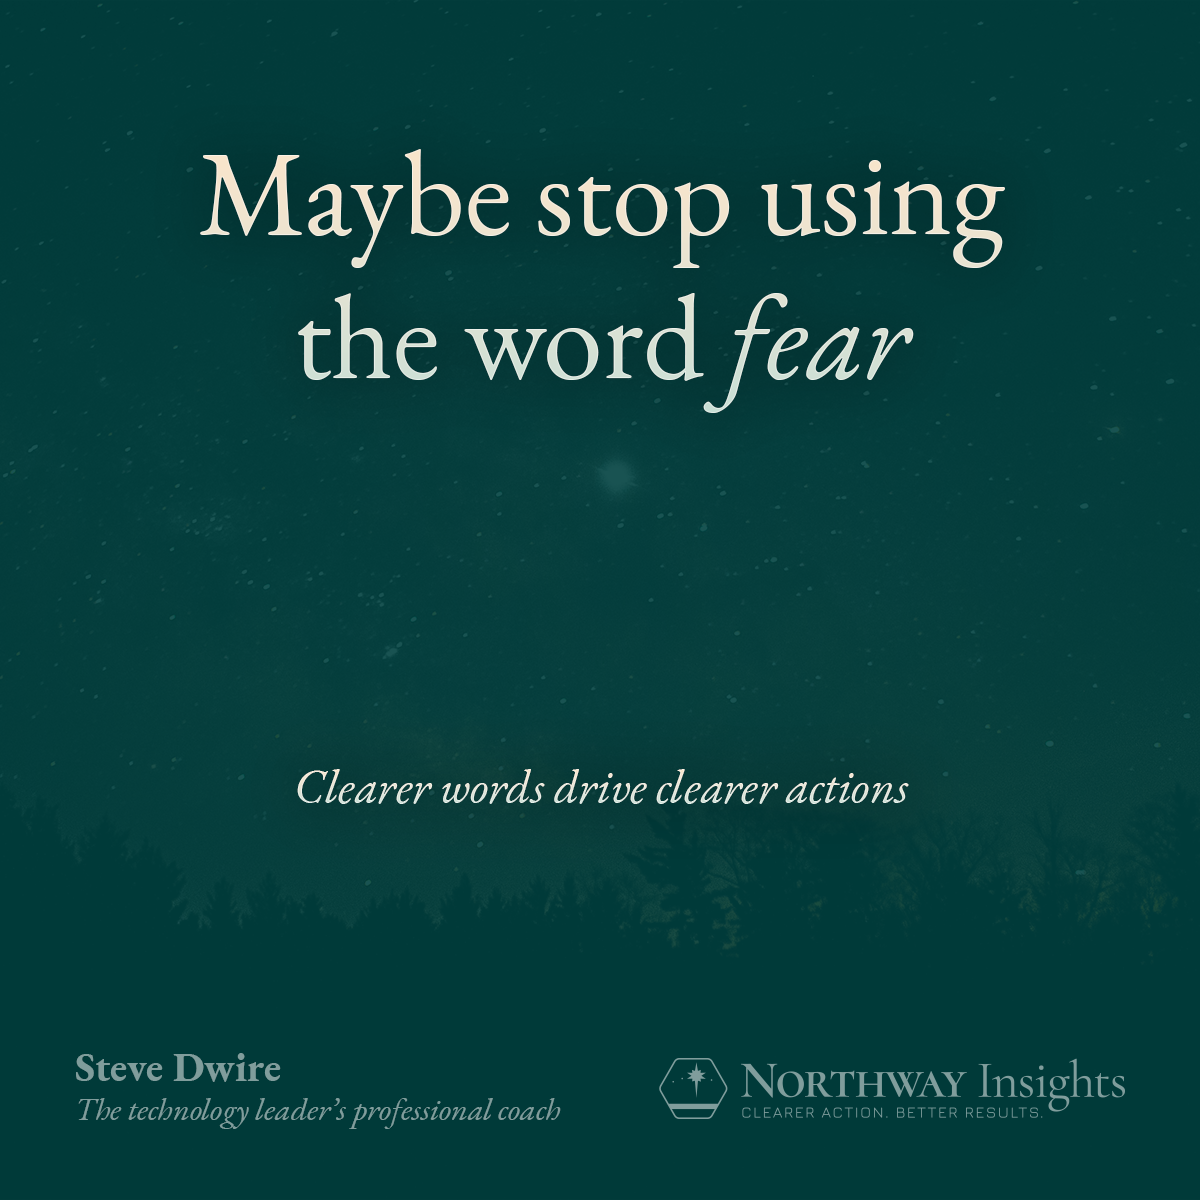 Maybe stop using the word "fear". Clearer words drive clearer actions.